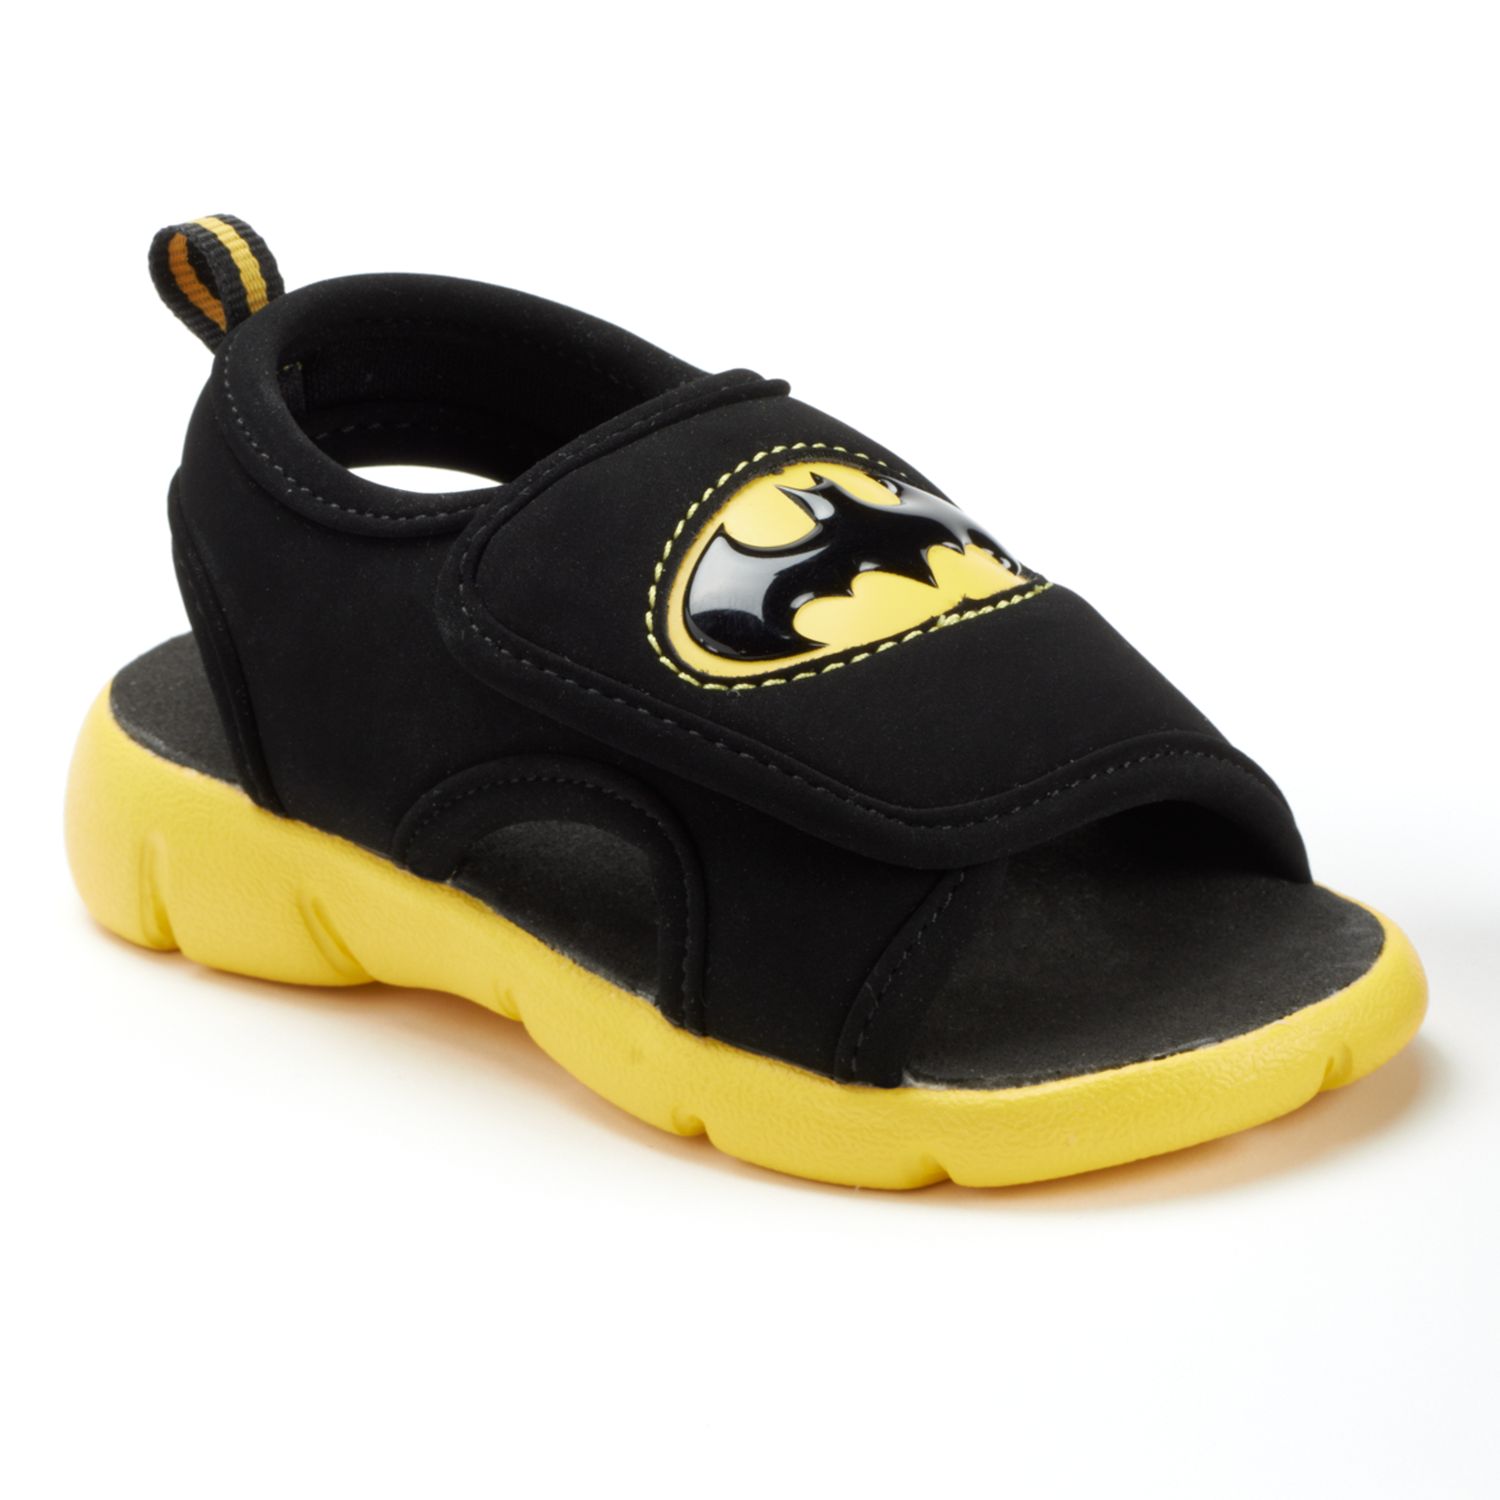 batman sandals for toddlers